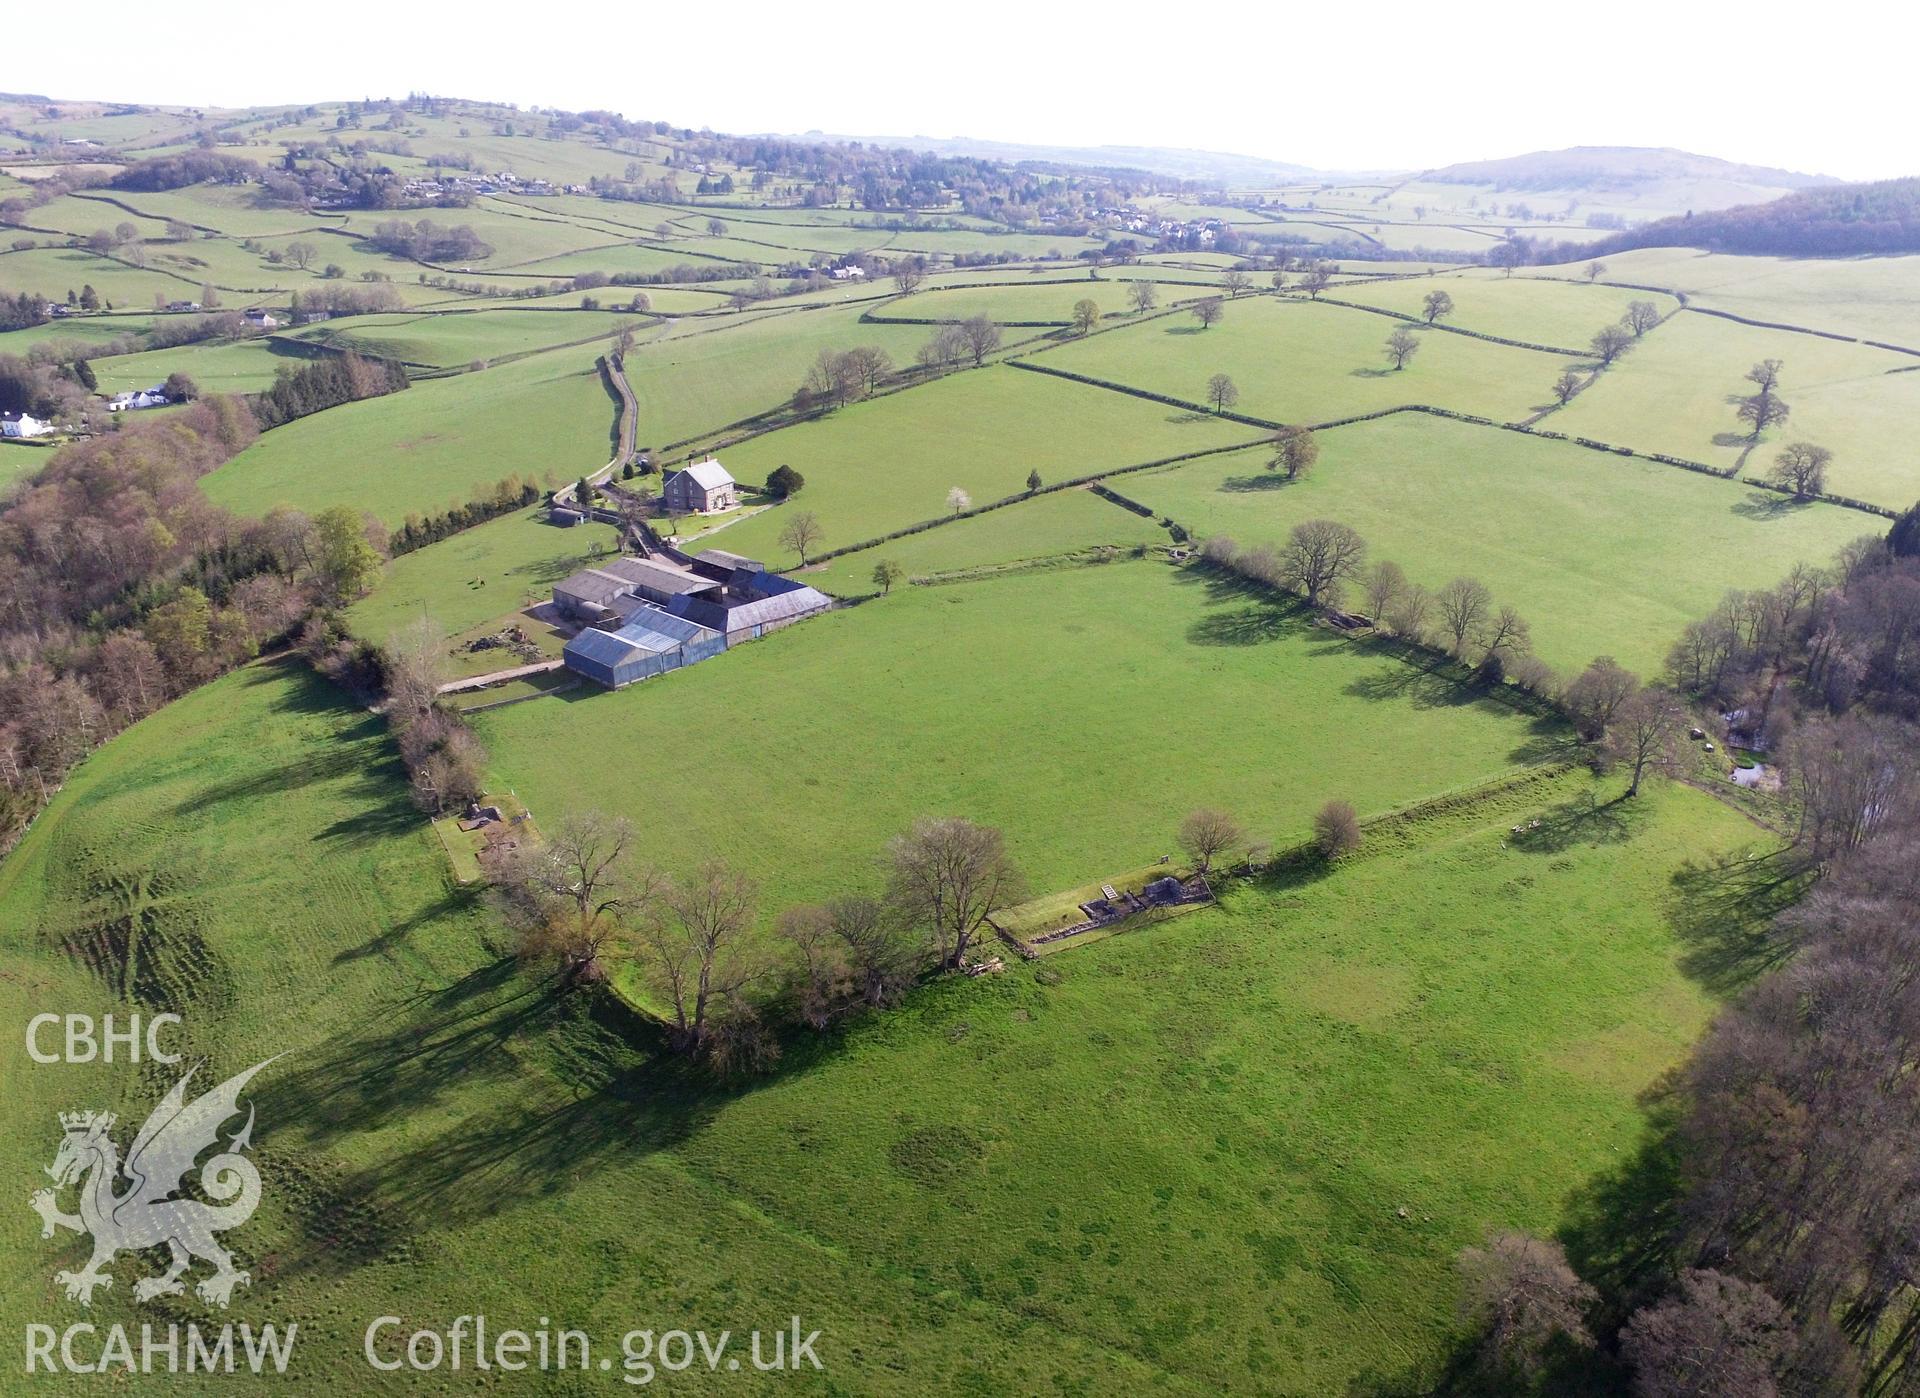 Colour aerial photo showing Brecon Gaer Roman Fort, taken by Paul R. Davis, 5th May 2016.